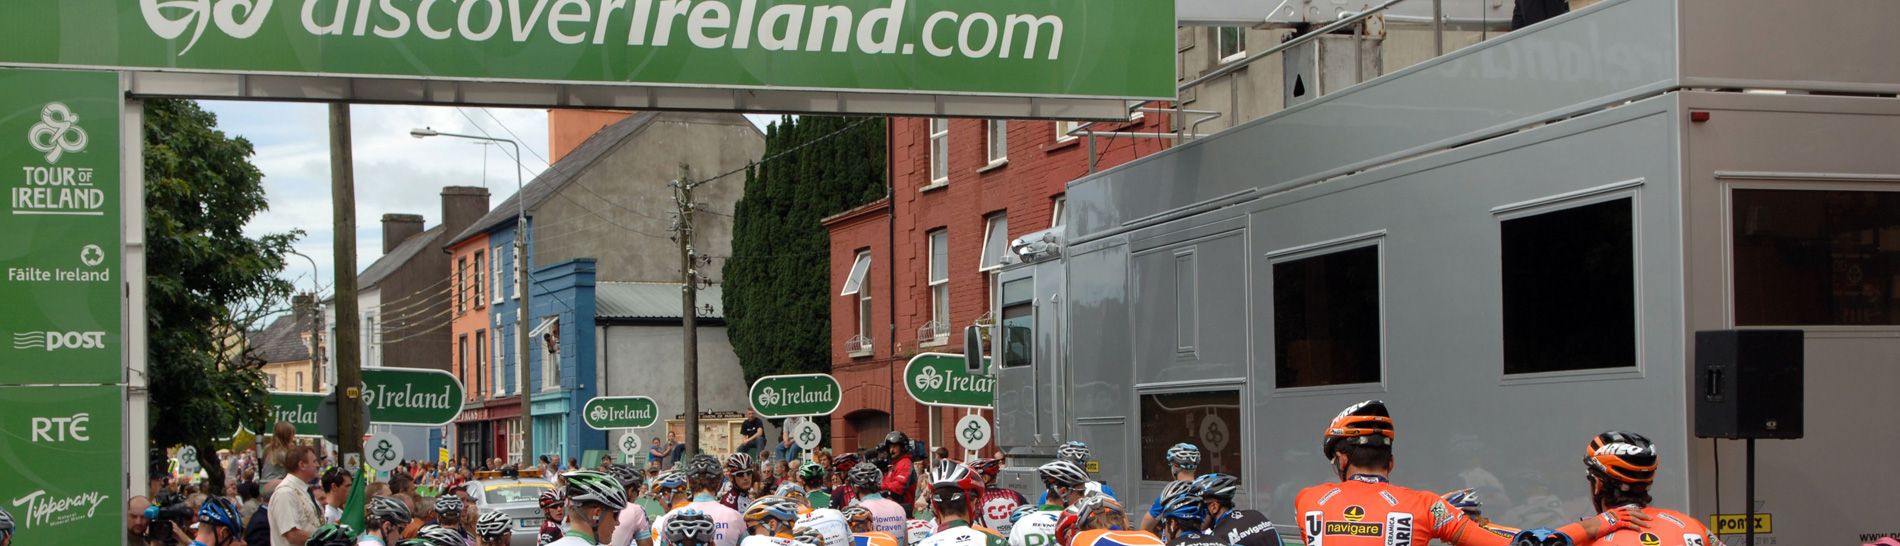 Tour of Ireland: activity at start and branding